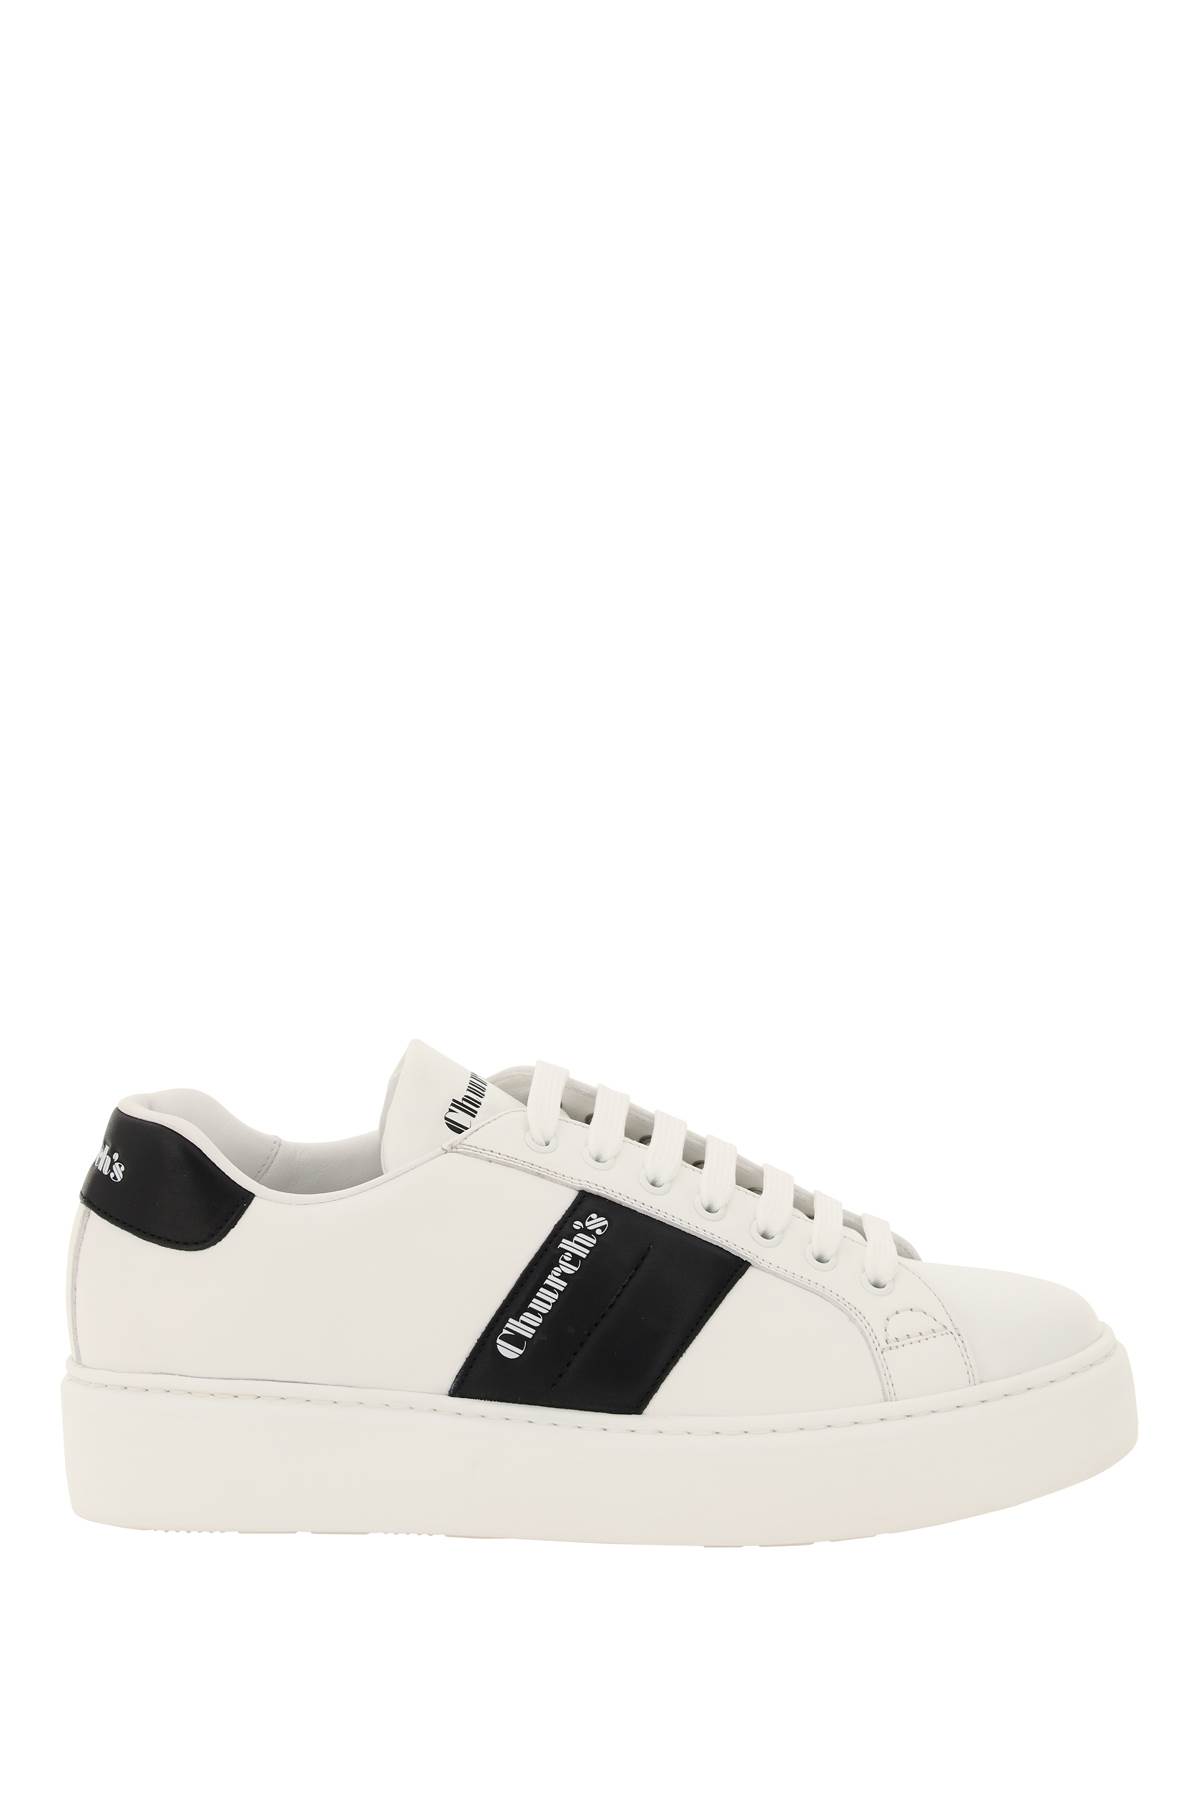 Churchs Mach 3 Leather Sneakers